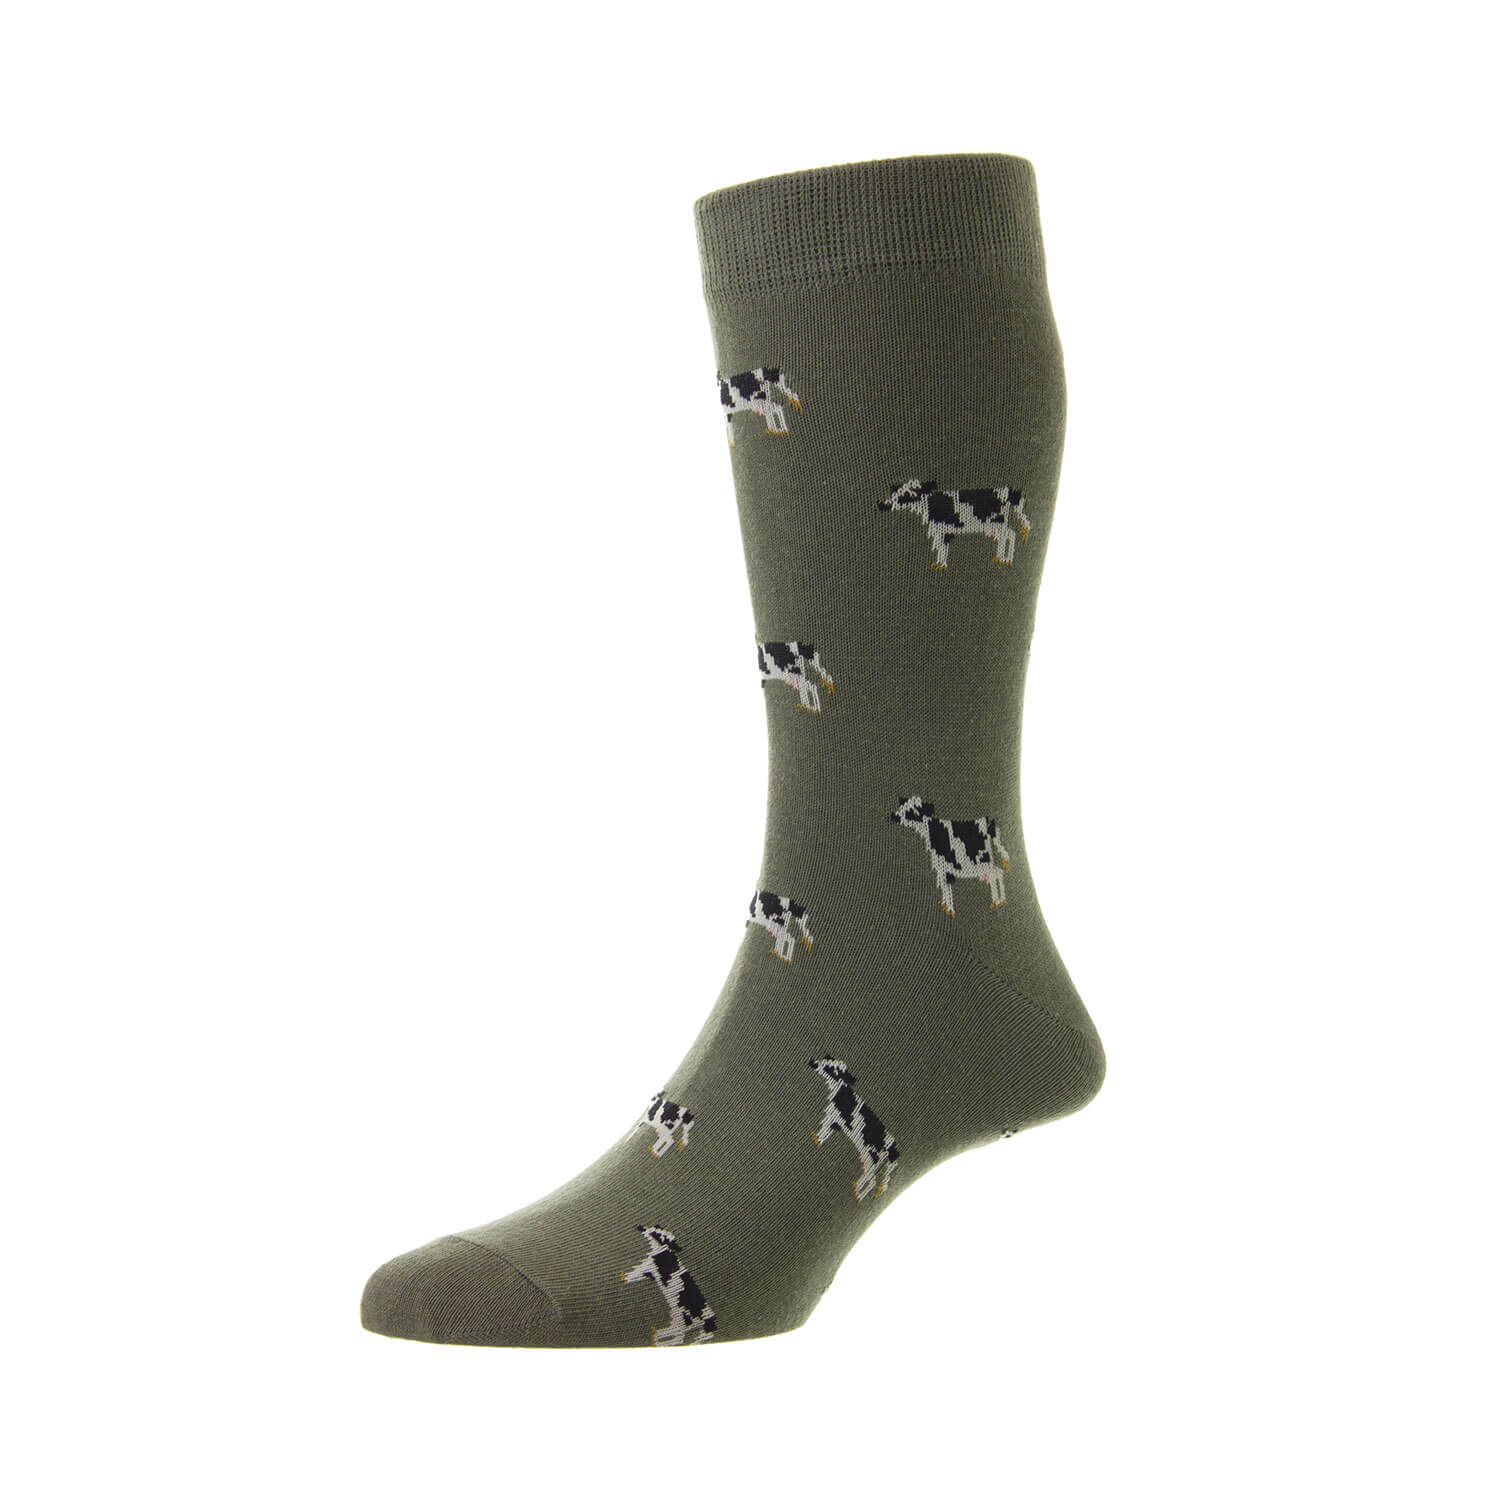 Hj Hall Cow Sock One Size - Olive Green 1 Shaws Department Stores